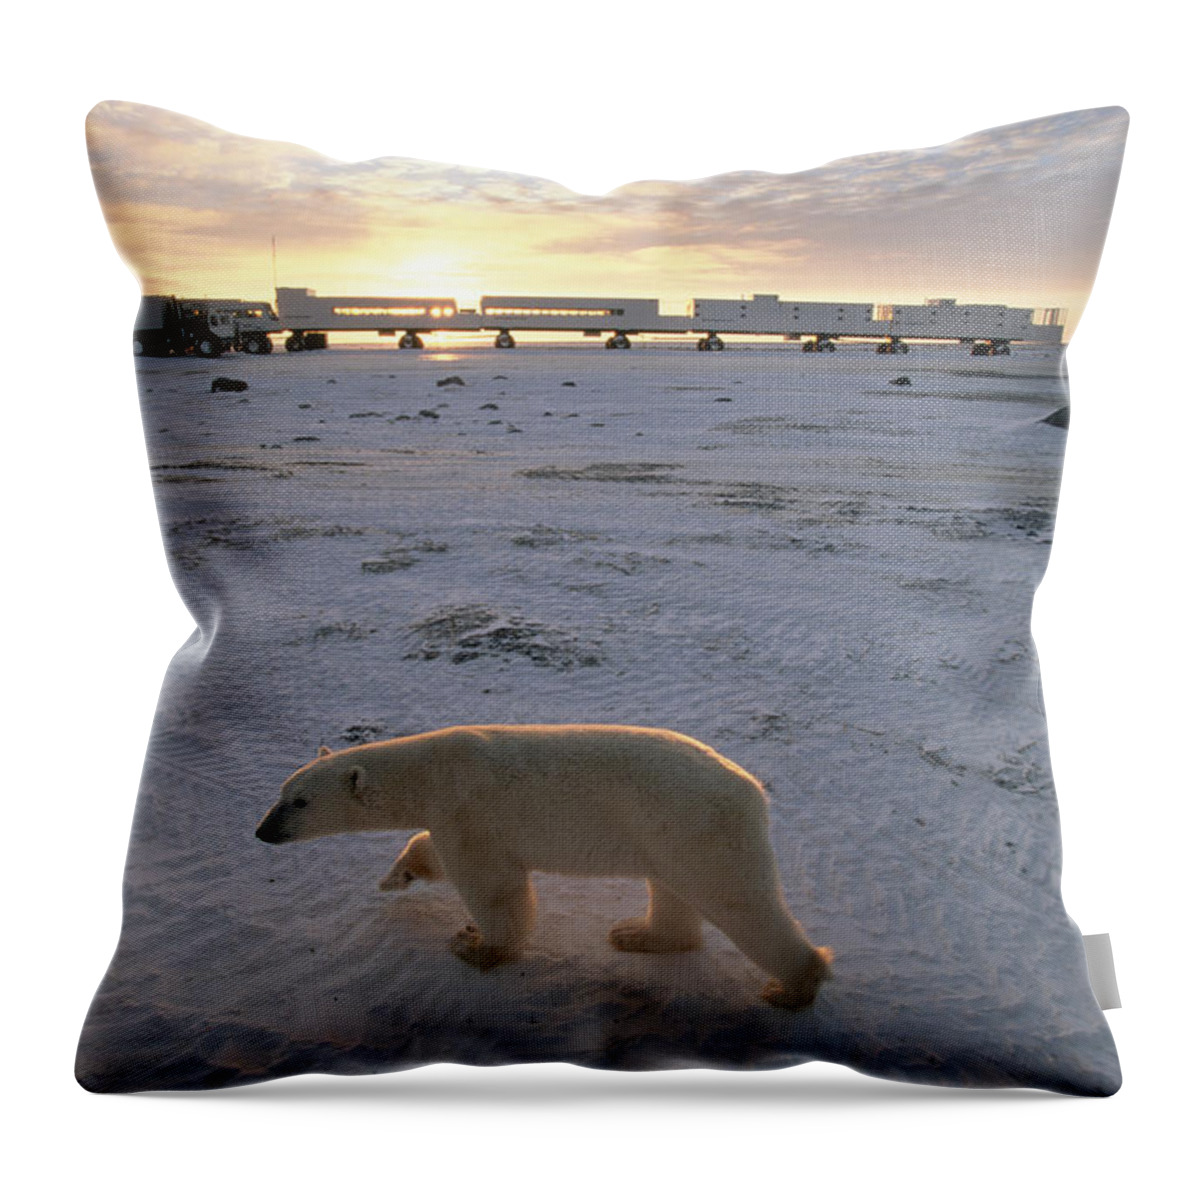 00125787 Throw Pillow featuring the photograph Polar Bear And Tundra Buggies Full by Flip Nicklin